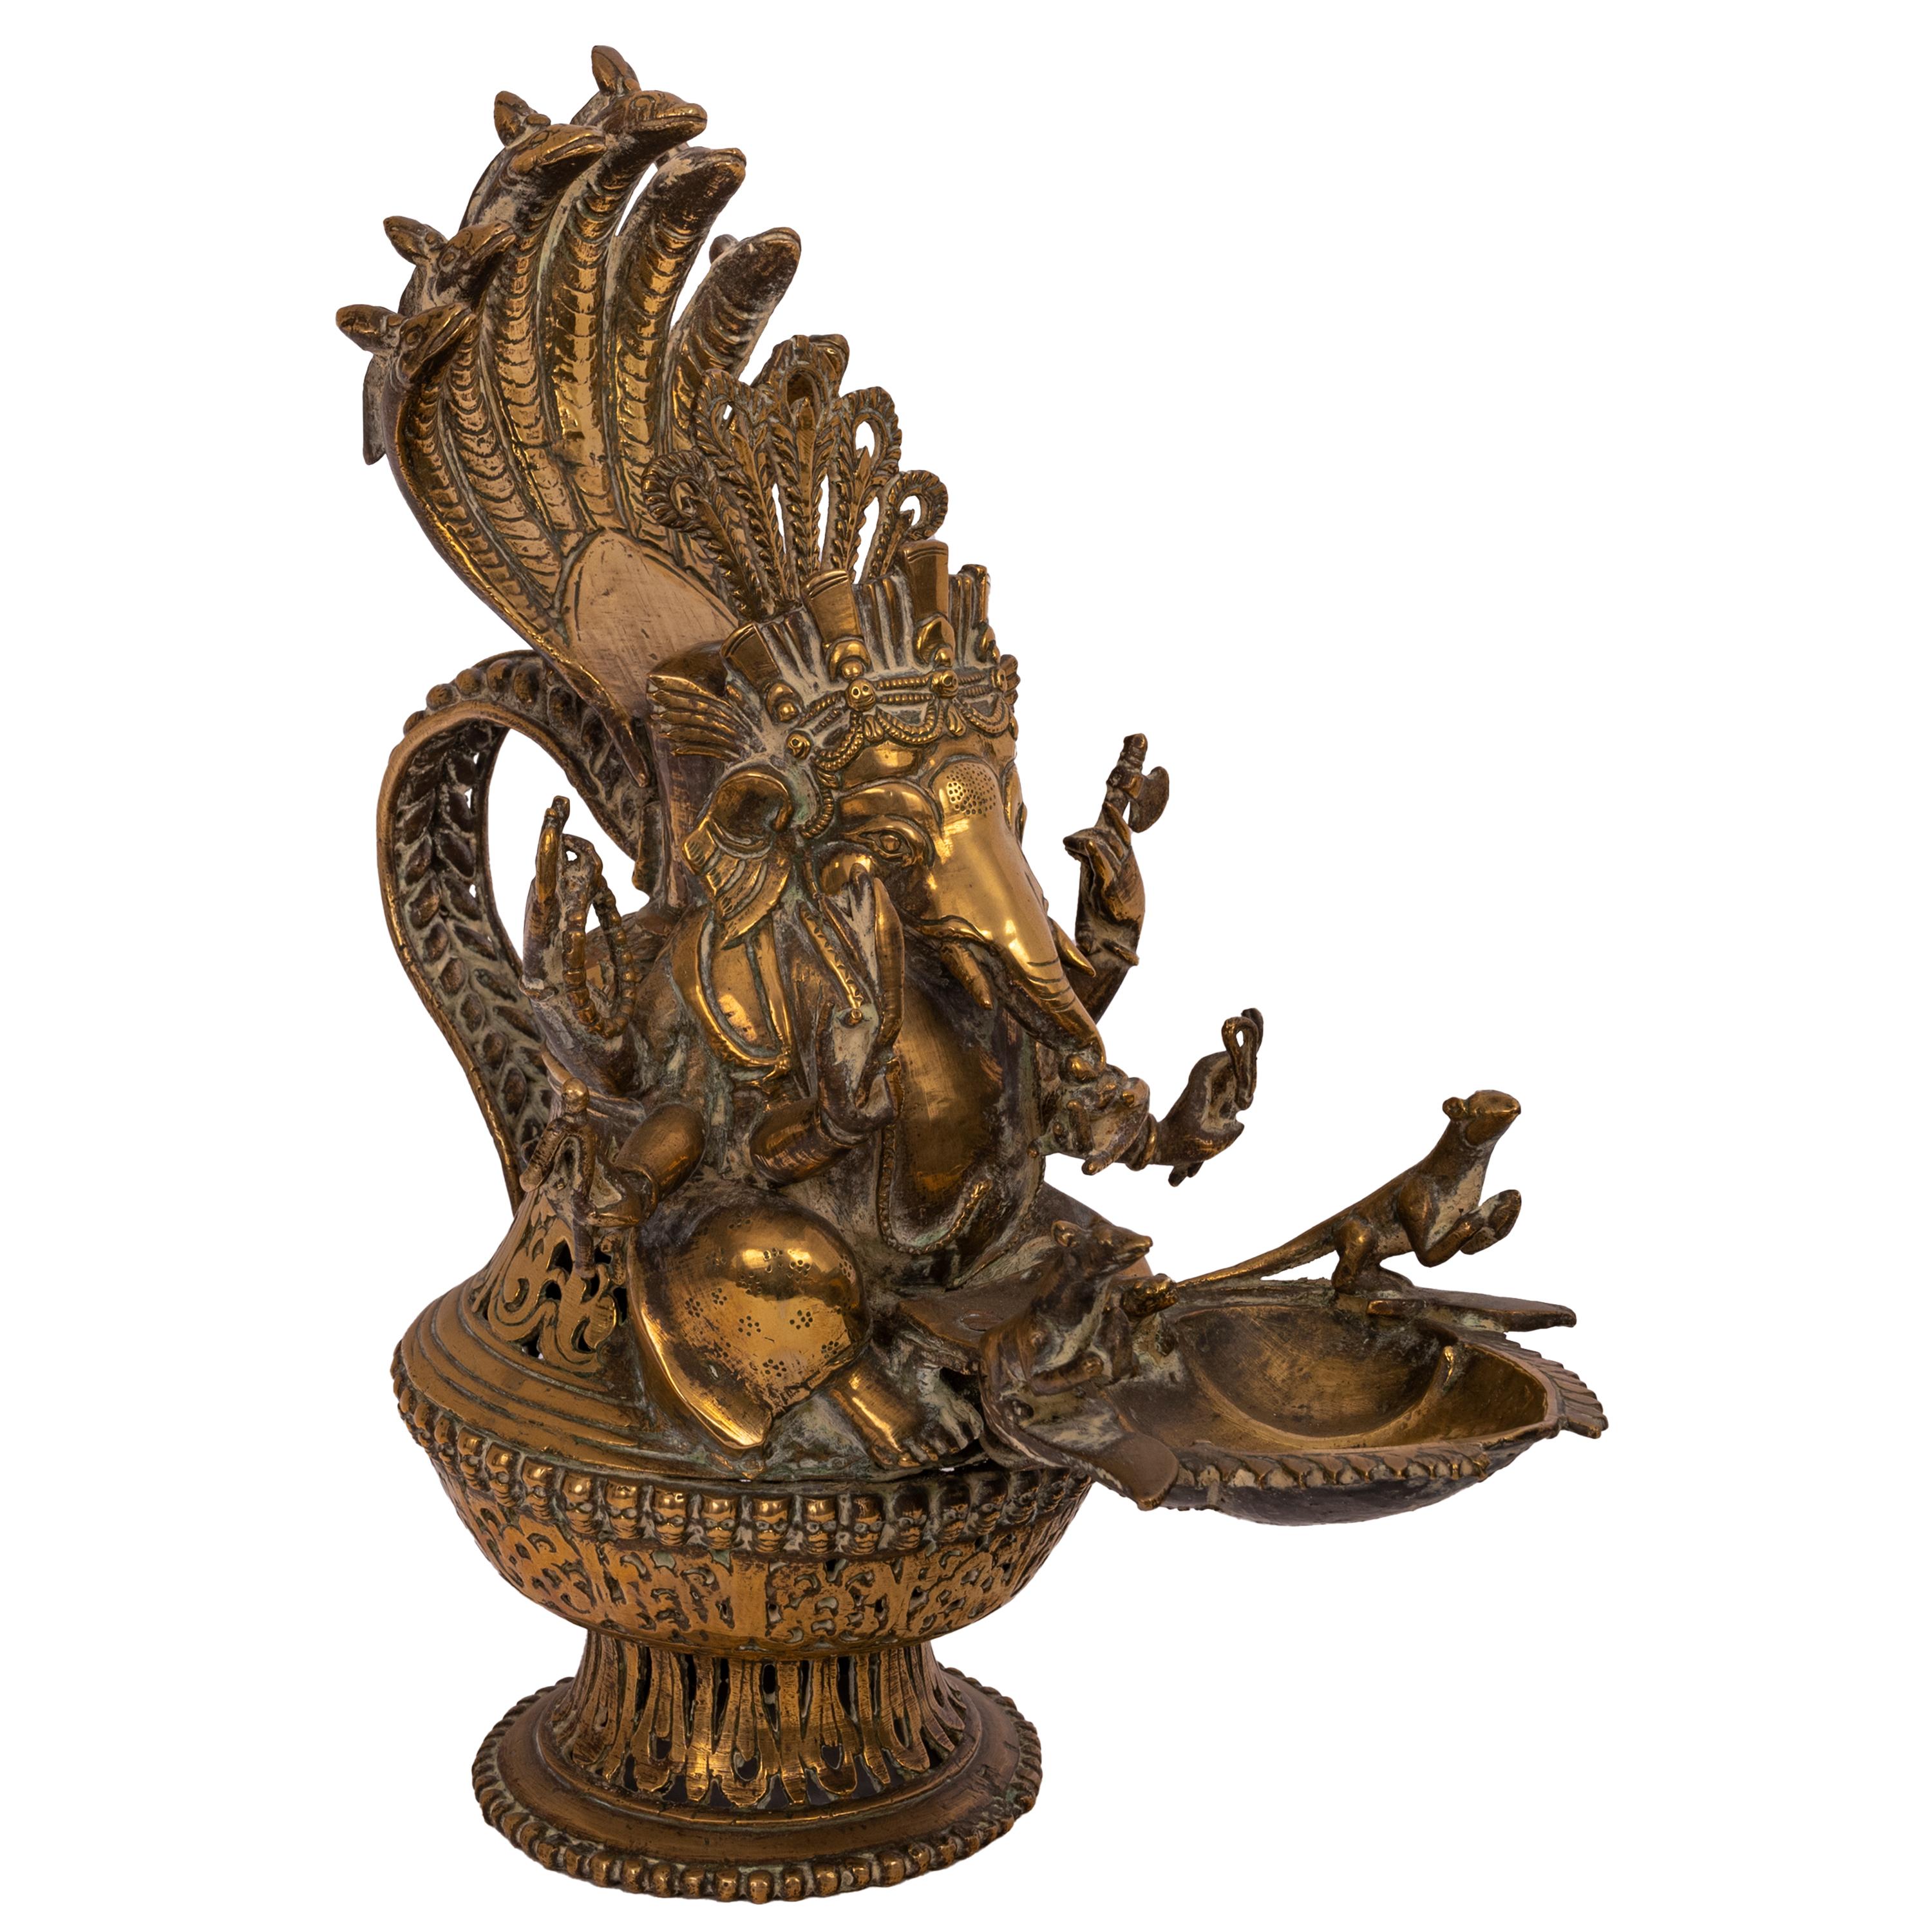 A large antique early 19th century Indian brass votive oil lamp modeled as the Hindu deity, Lord Ganesha, circa 1800.
A finely cast brass figure of Lord Ganesha with a crown of snakes and four arms, the head of Ganesha having a hinged lid to fill